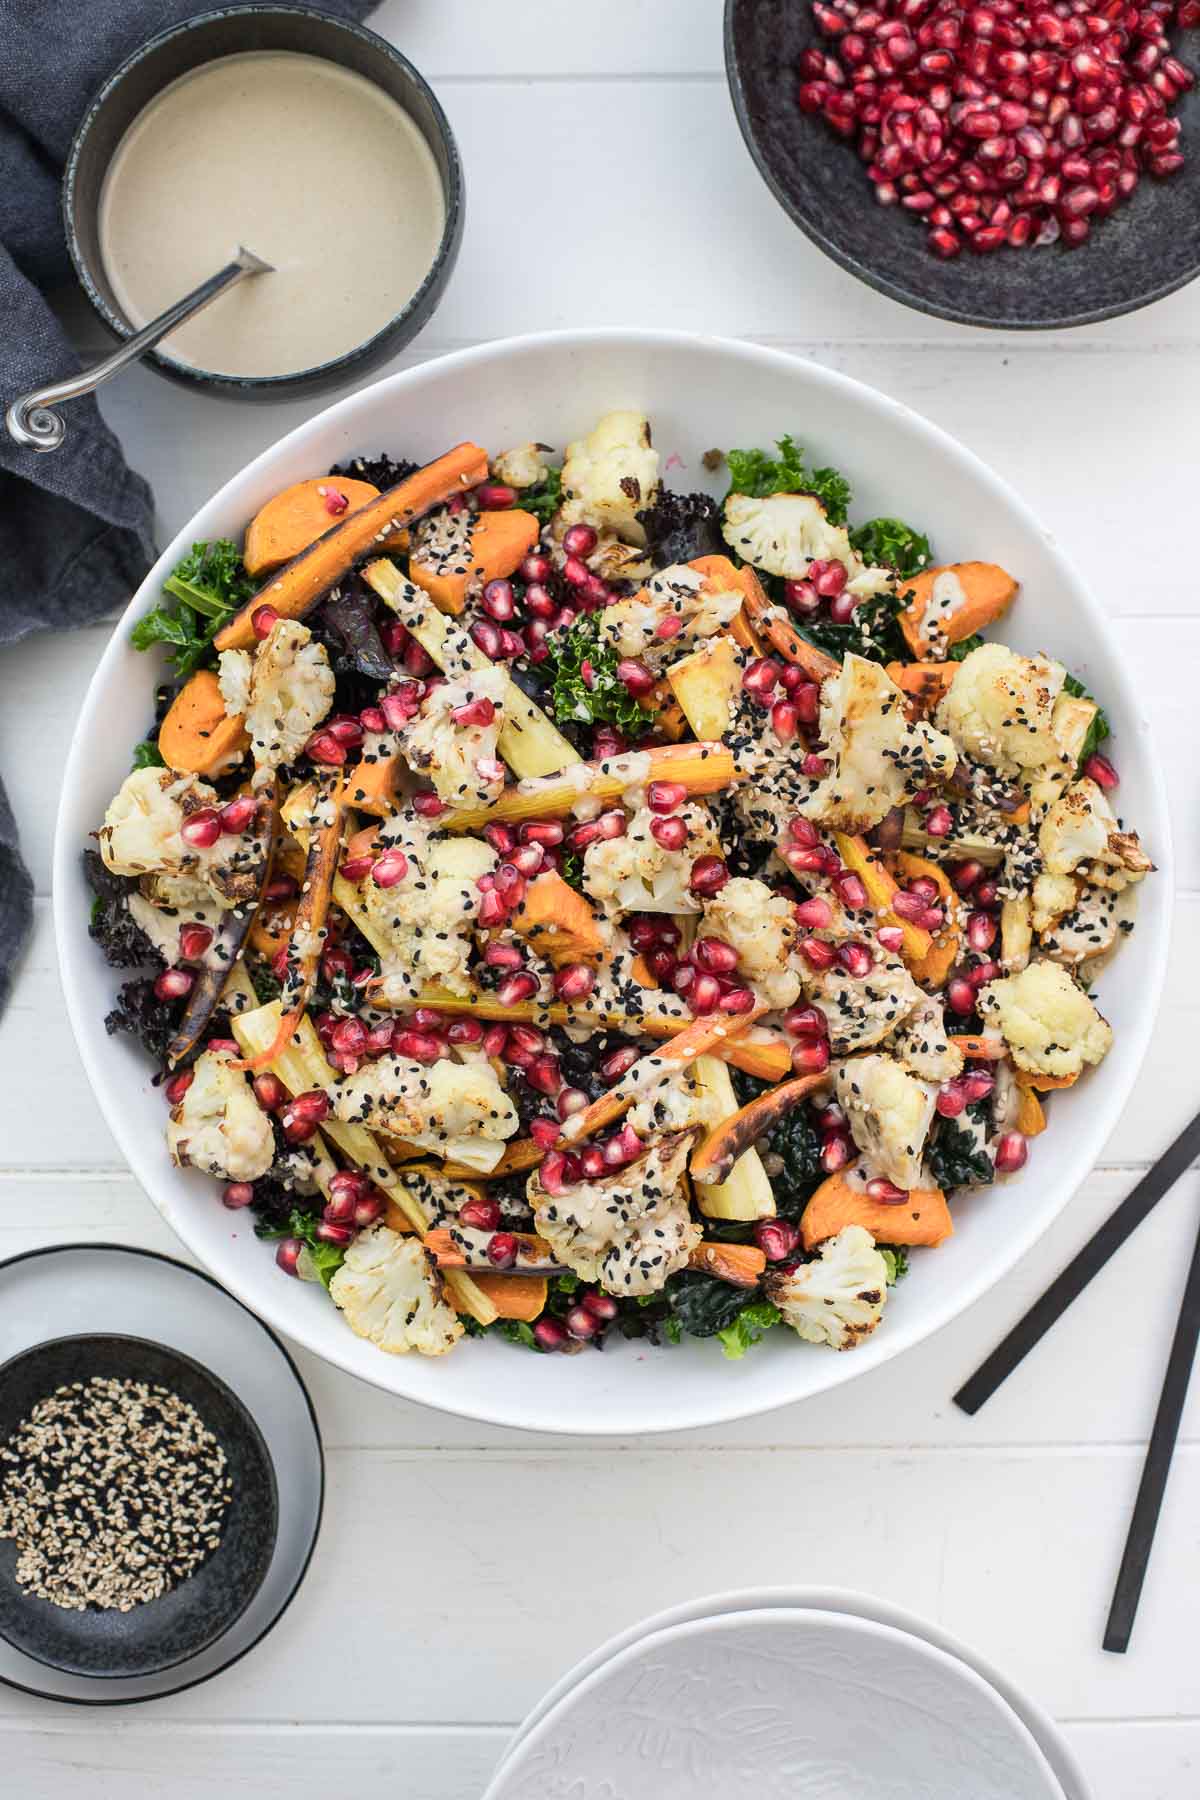 Kale Salad with Roasted Vegetables, Lentils and Tahini Dressing